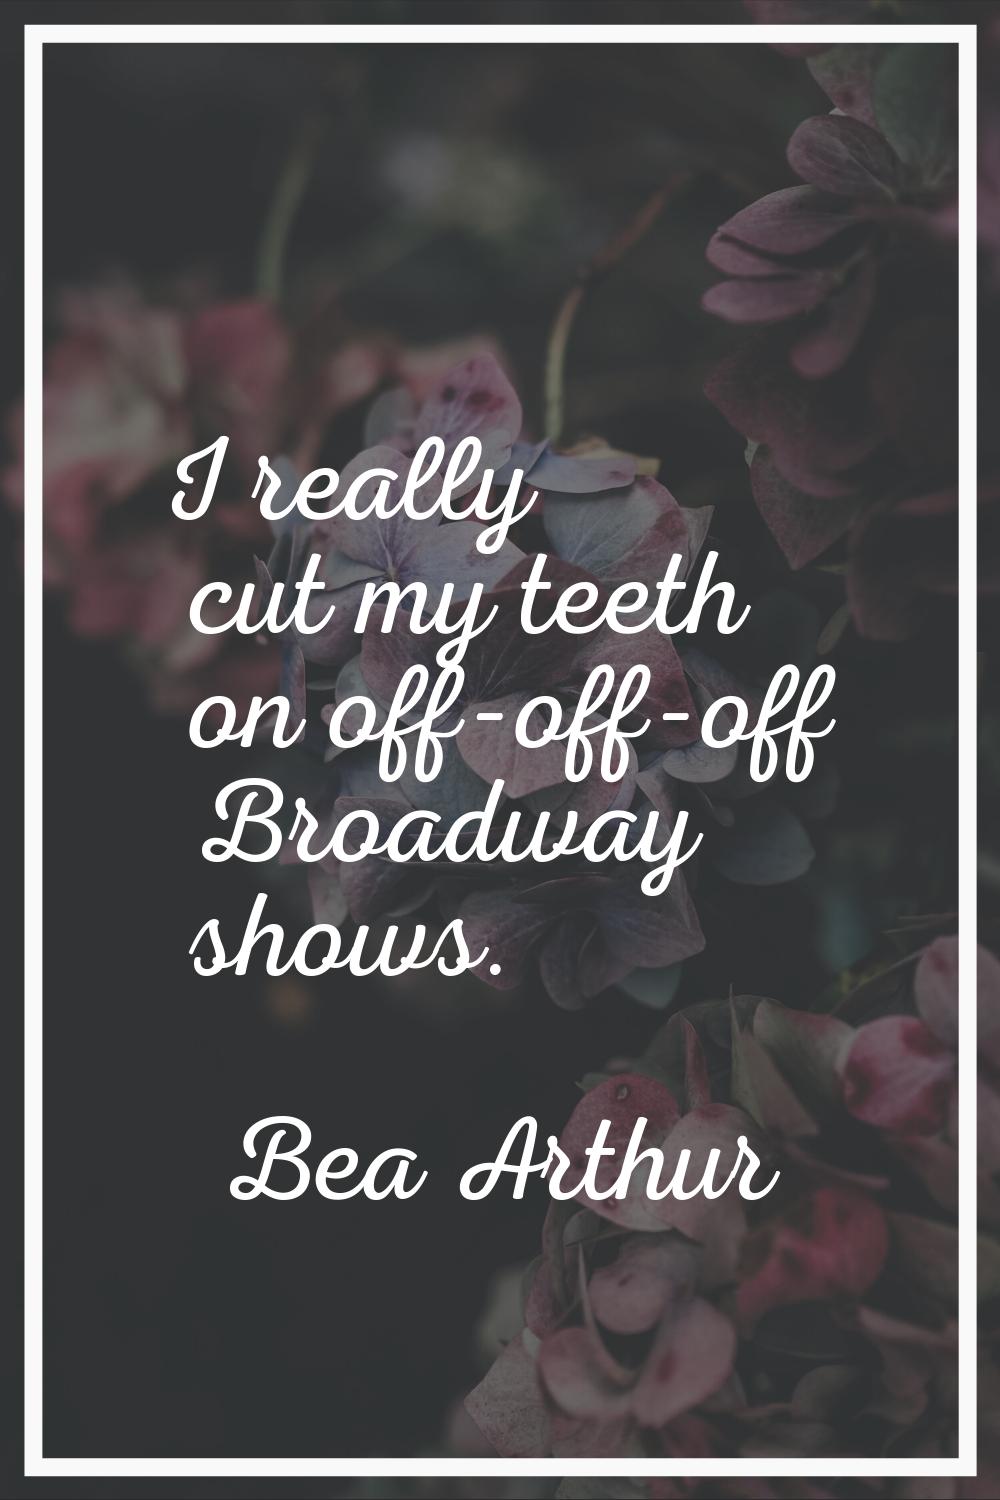 I really cut my teeth on off-off-off Broadway shows.